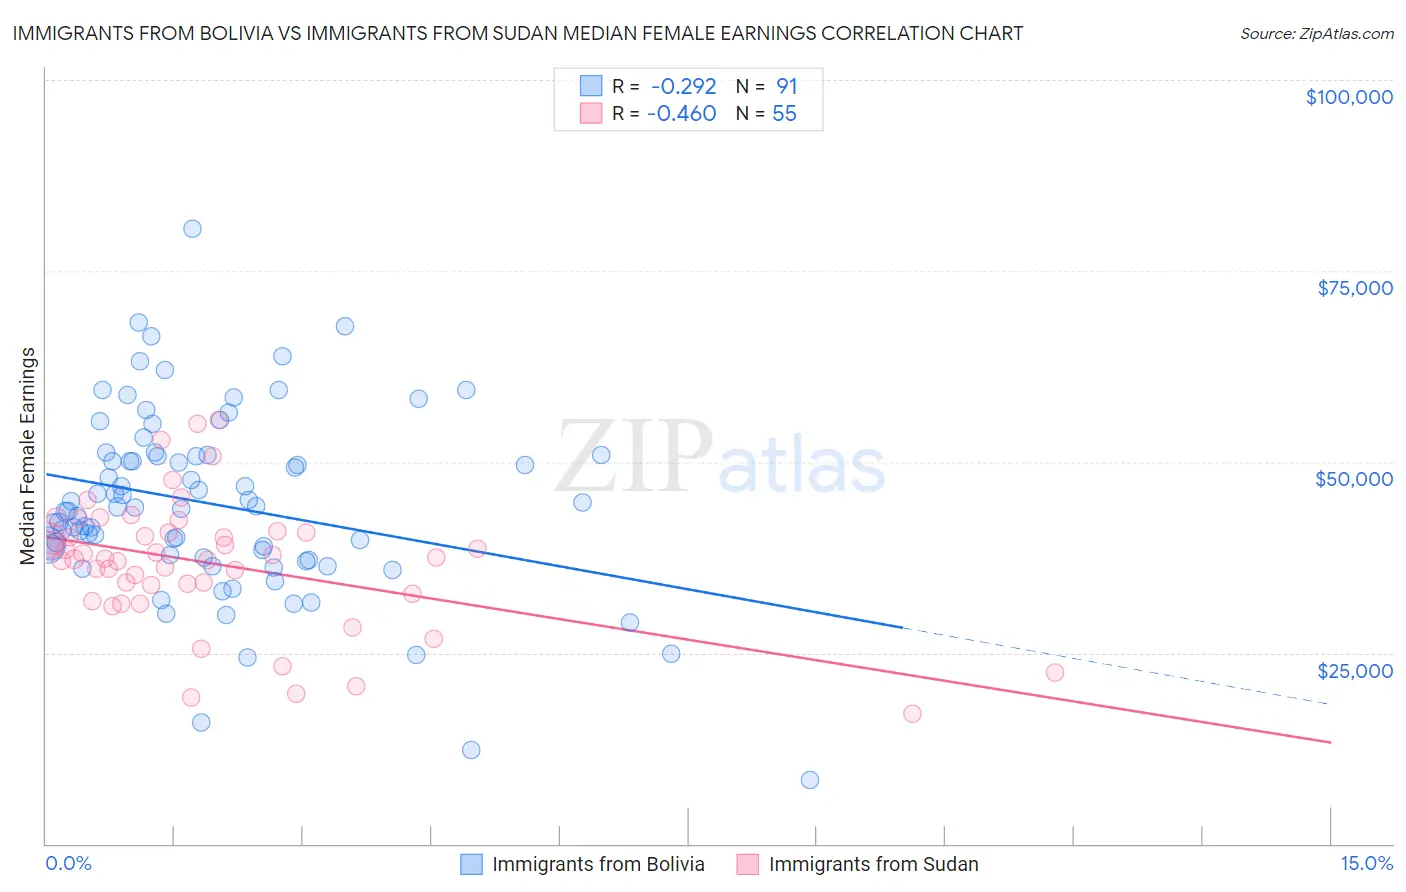 Immigrants from Bolivia vs Immigrants from Sudan Median Female Earnings